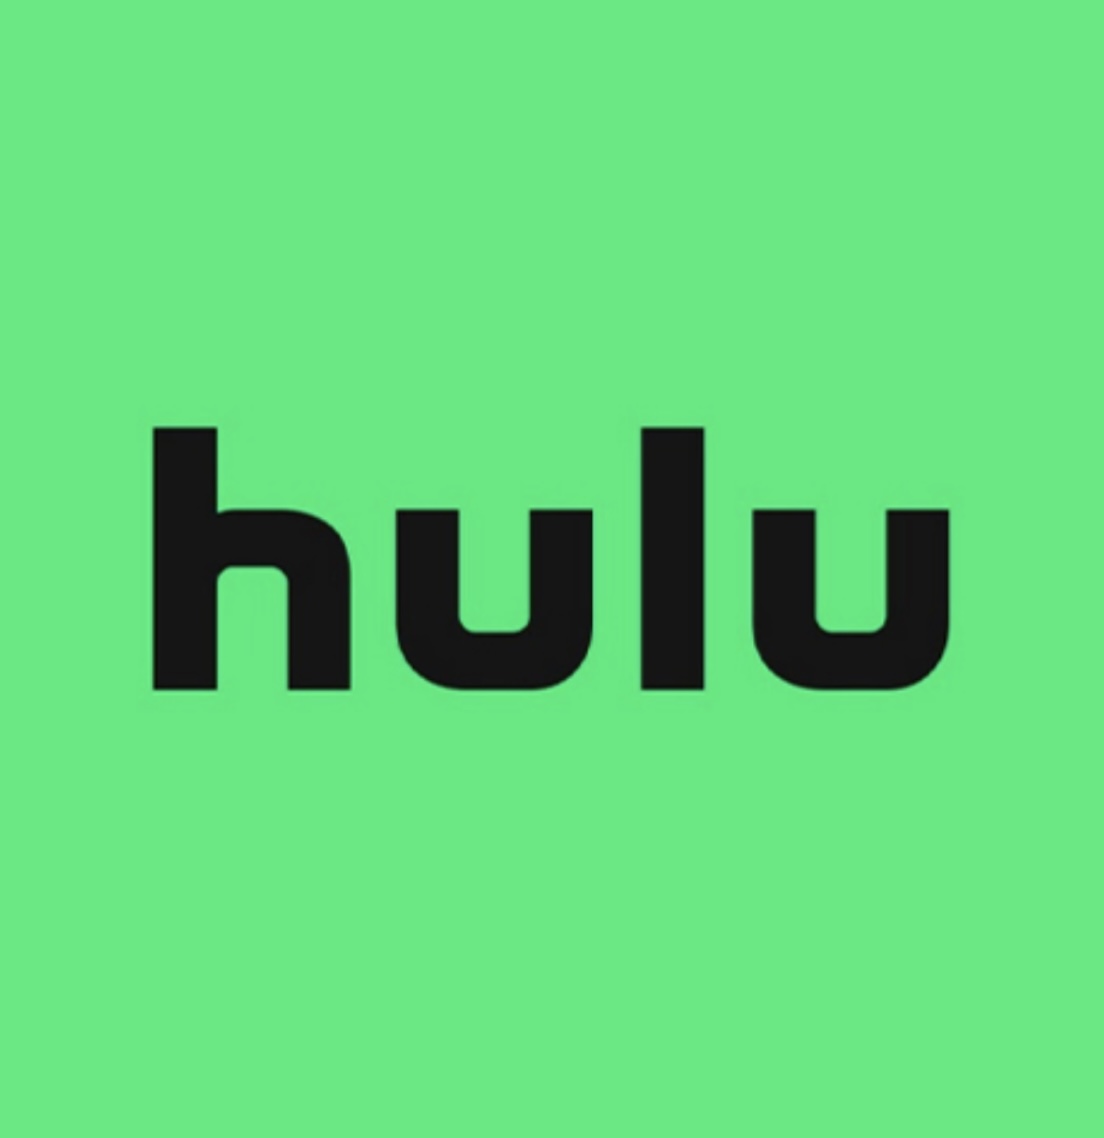 The Hulu logo can be seen which is where all of the mentioned shows can be found.